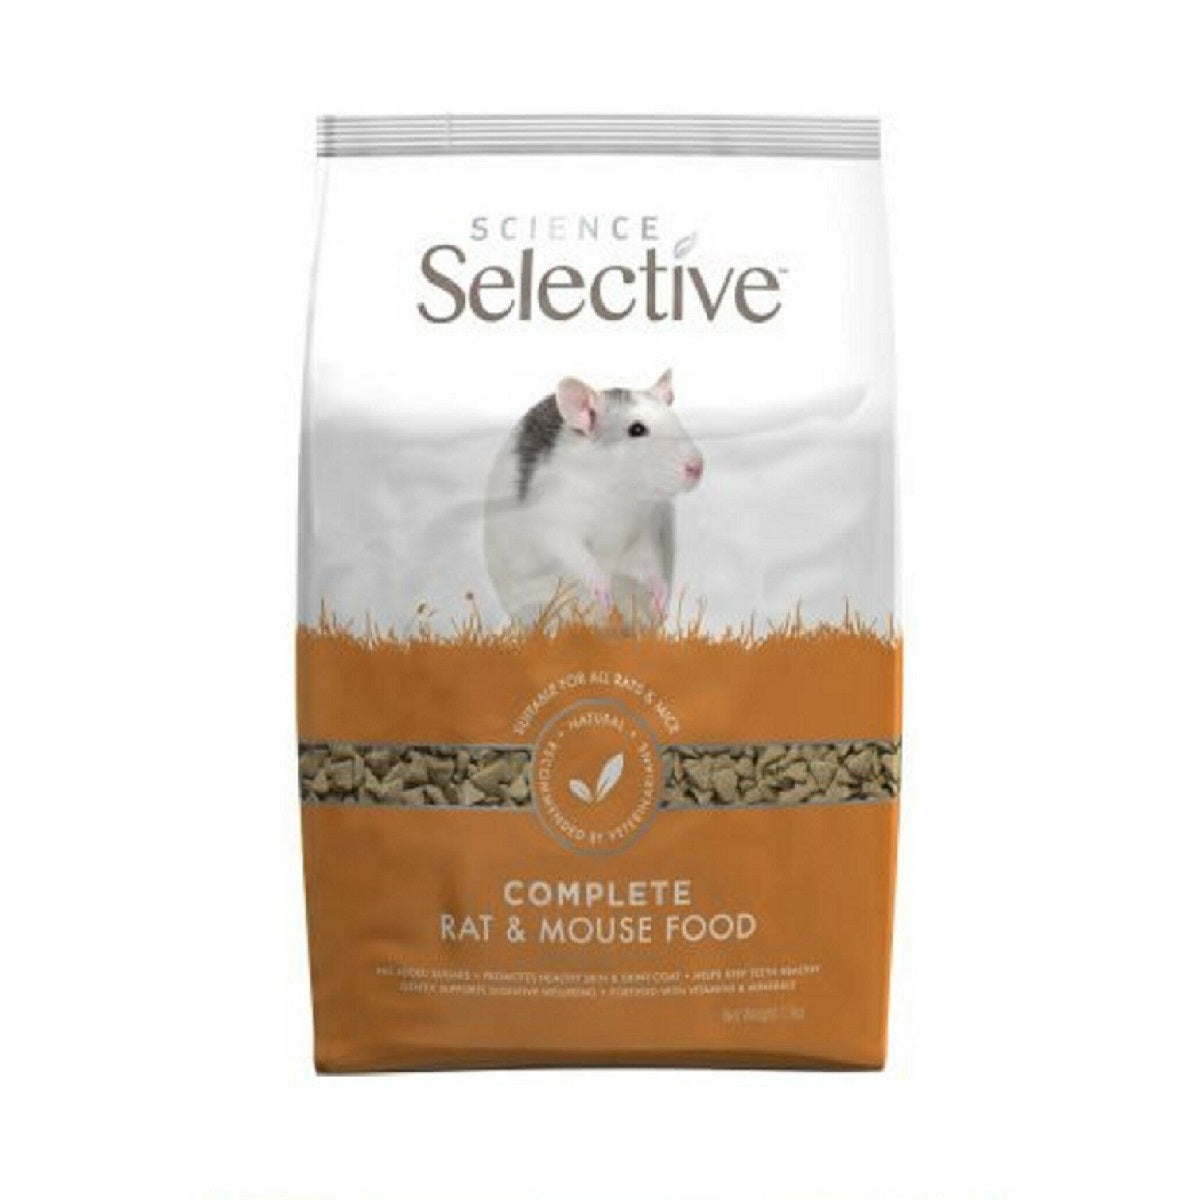 Science Selective - Complete Rat and Mouse Food